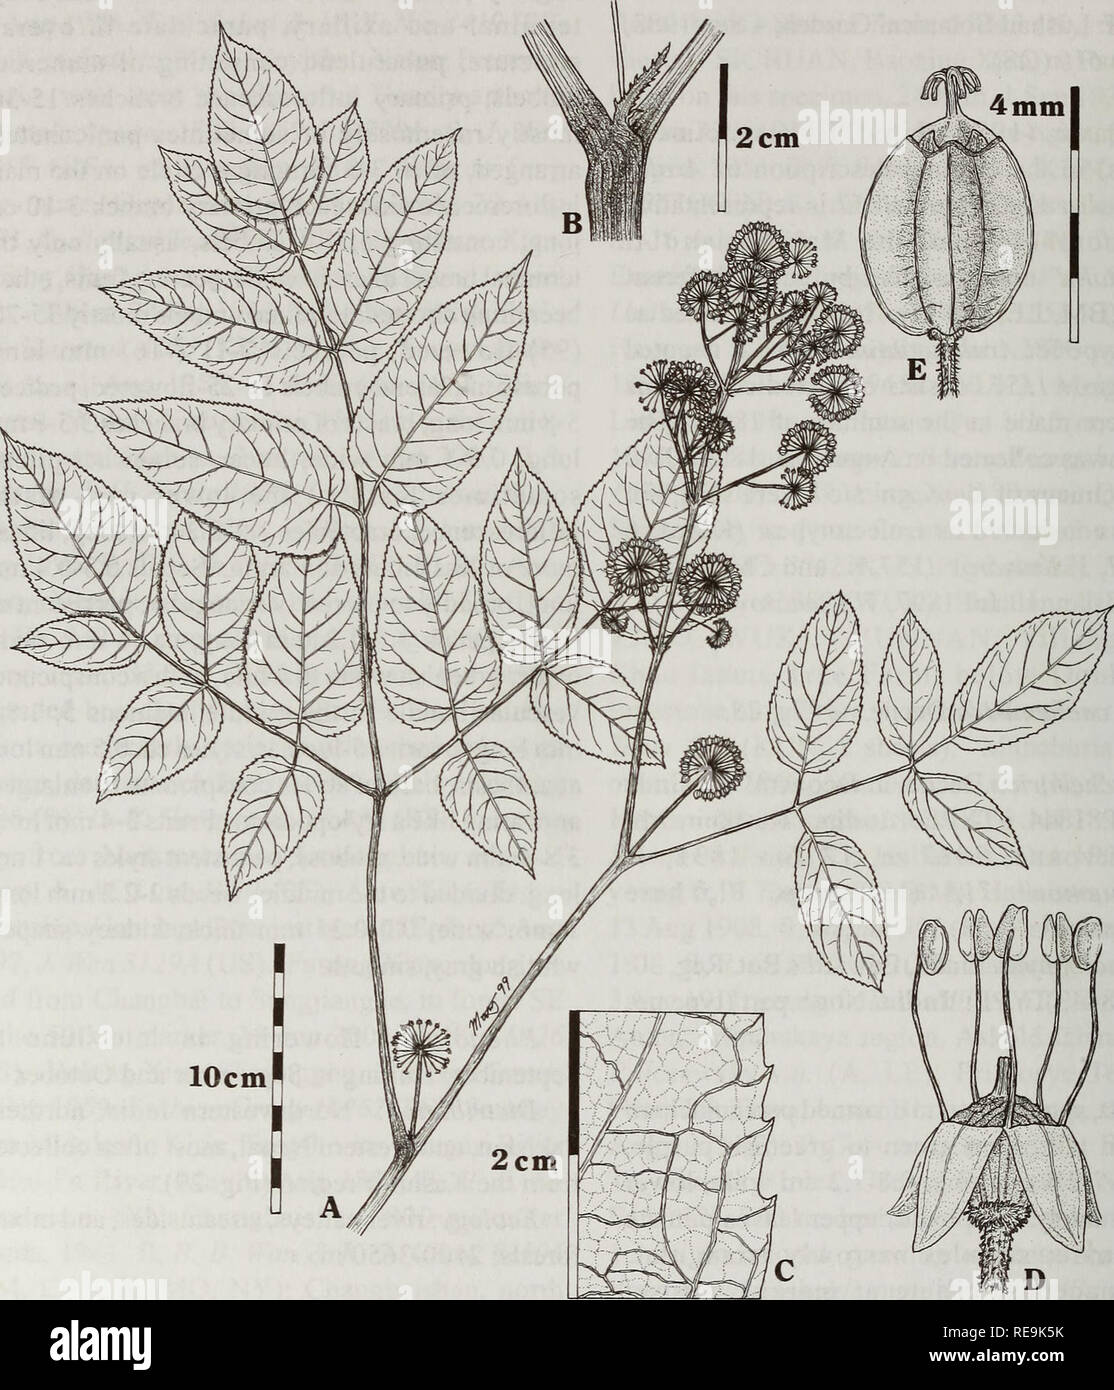 . Contributions from the United States National Herbarium. Botany. Systematics of Aral'ia. 2 mm Fig. 28. Aralia cachemirica Decne. A. Habit showing leaves and inflorescences. B. Leaf base showing stipule morphology. C. Close-up showing leaflet margin. D. Flower. E. Young fruit. Theog, 8000 ft, 1 Sep 1886, fl, H. Collett 584 (K, 2 sheets). JAMMU &amp; KASHMIR: V.Jacquemont 717 (P); Astor Valley near Dashkin, 26 Jul 1892, J. F Duthie 12254 (BM); Erin Valley, near Bandapur, 8,000 ft, 25 Jul 1940, on edge of cultivation, F Ludlow &amp; G Sherriff 7831 (E); Kulewan, 7750 ft, 22 Jul 1876, C B. Clark Stock Photo